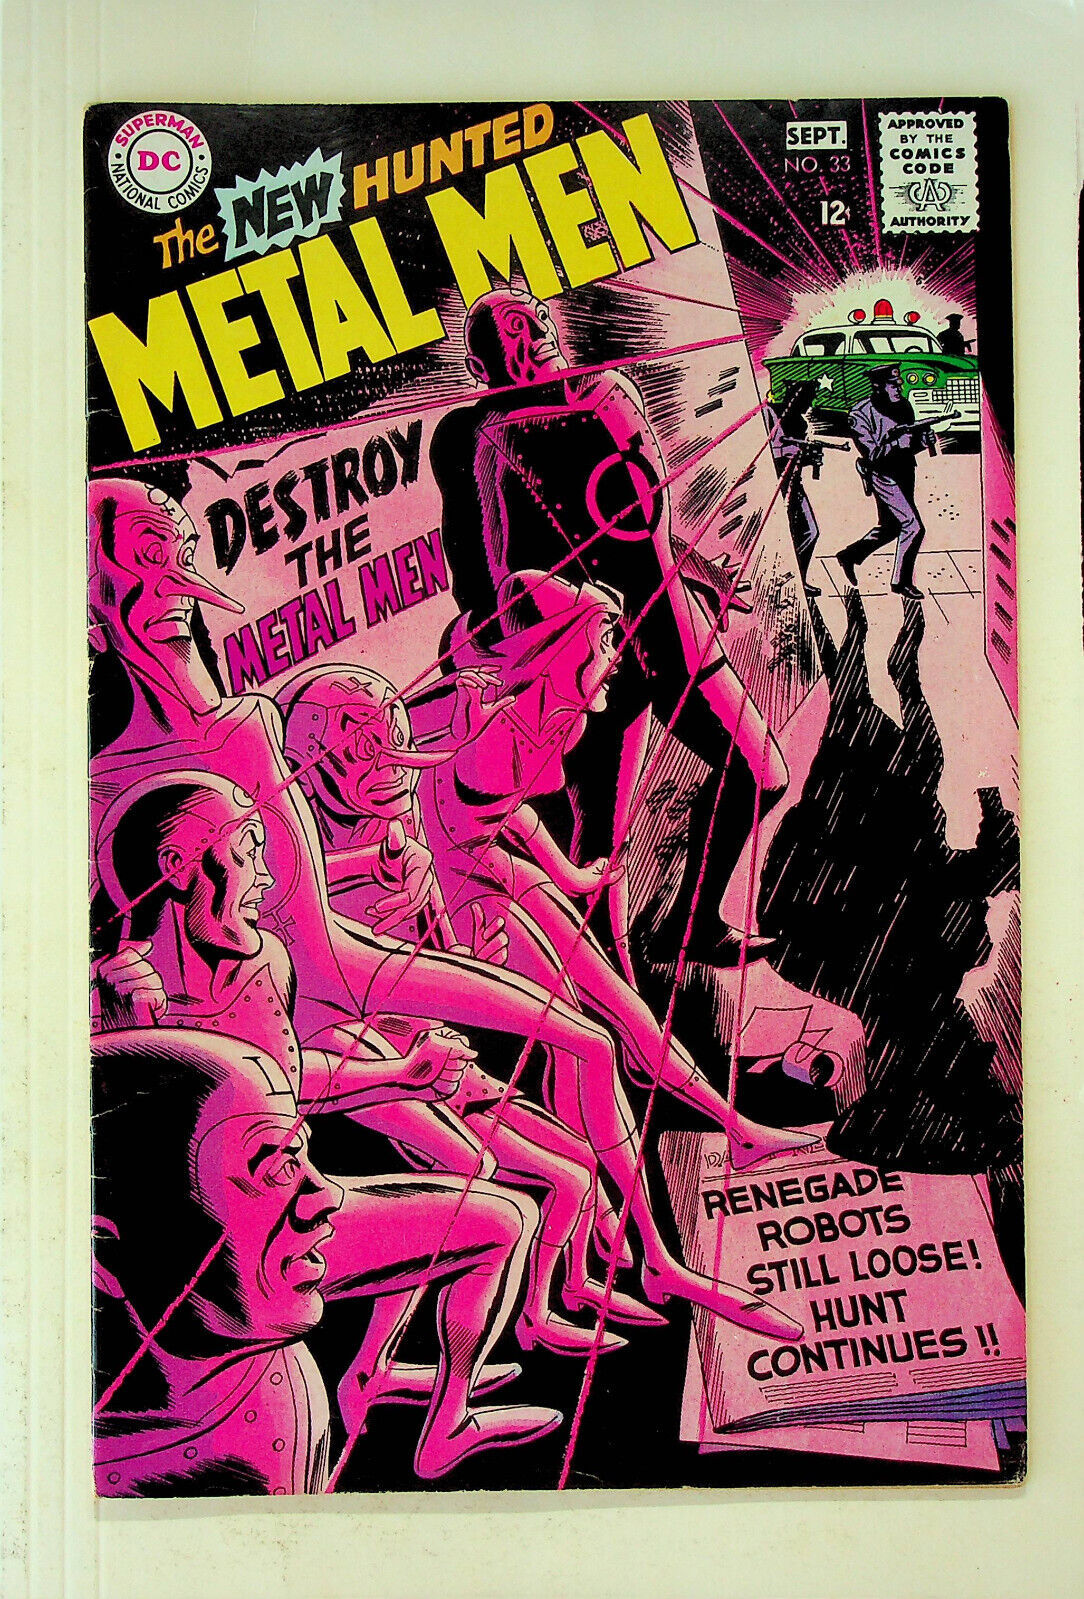 Primary image for Metal Men #33 (Aug - Sep 1968, DC) - Very Fine/Near Mint